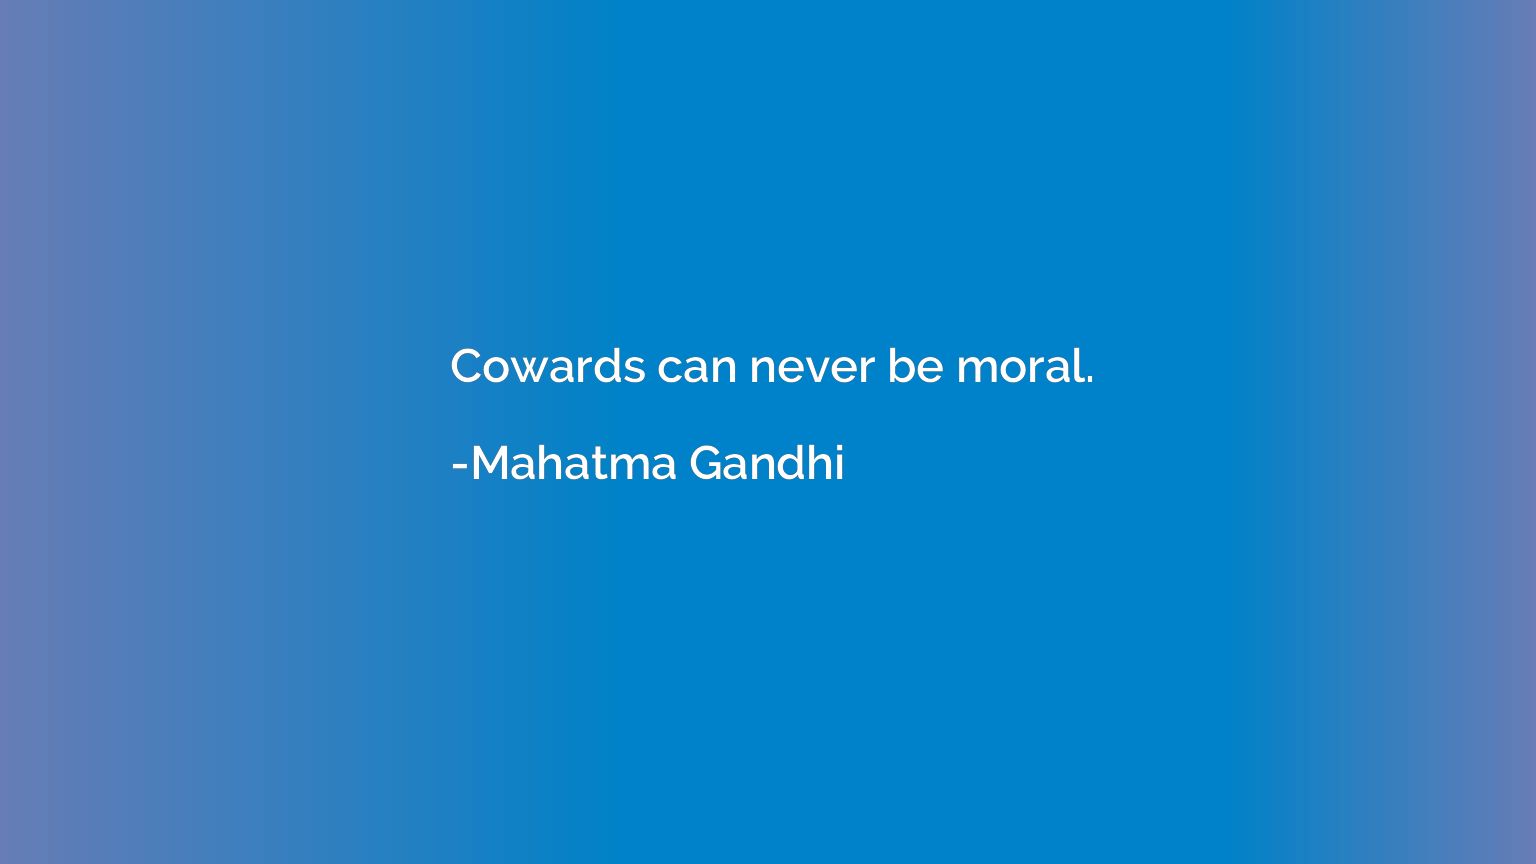 Cowards can never be moral.